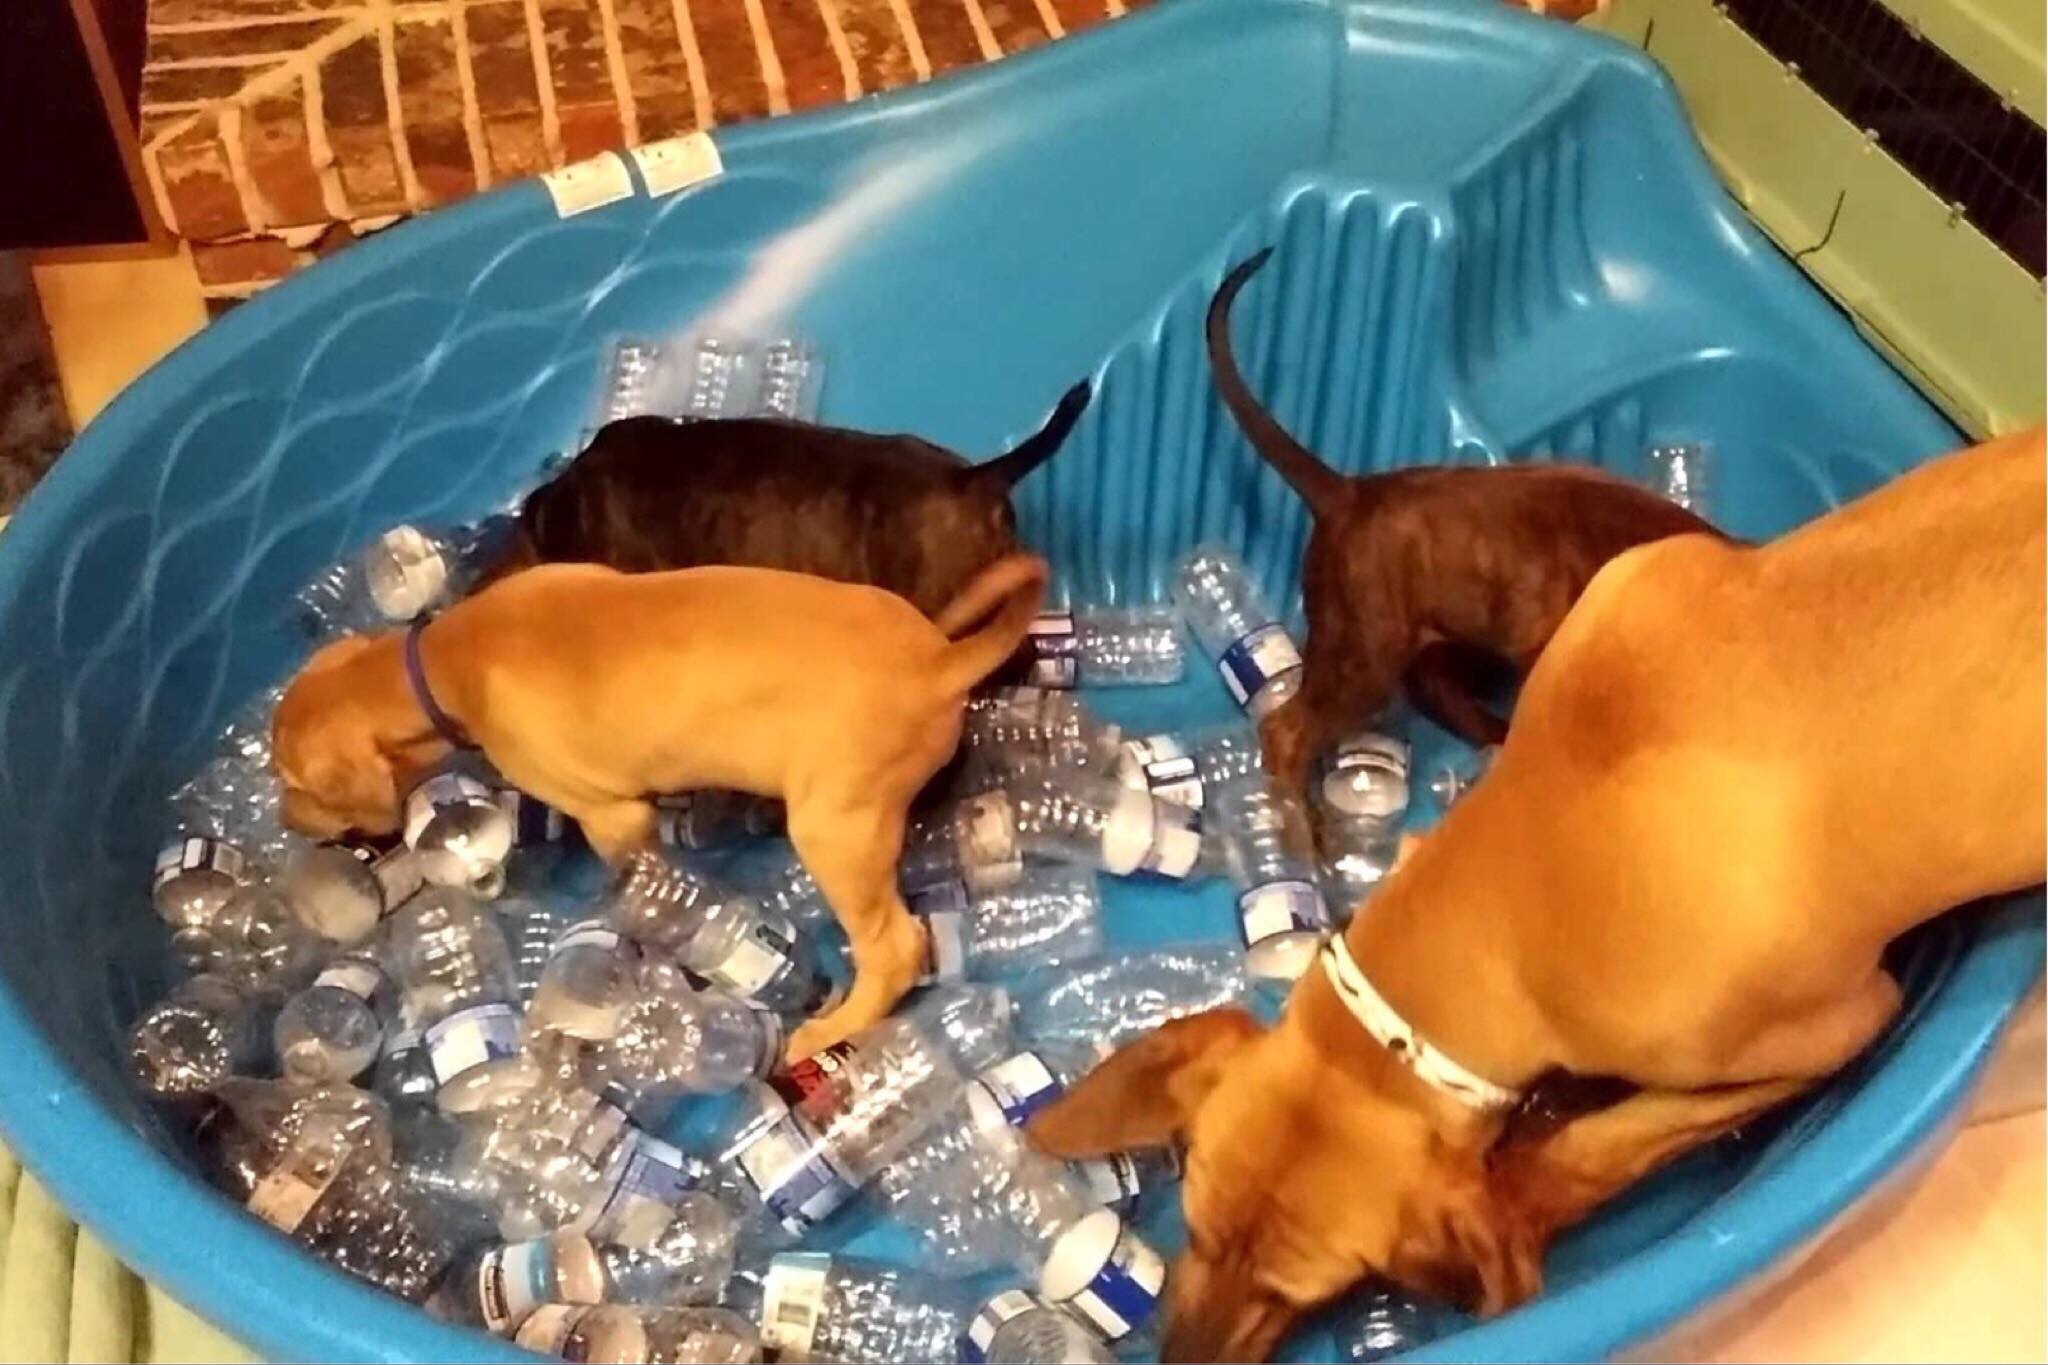 Baby Pool filled with Kibble and Bottles